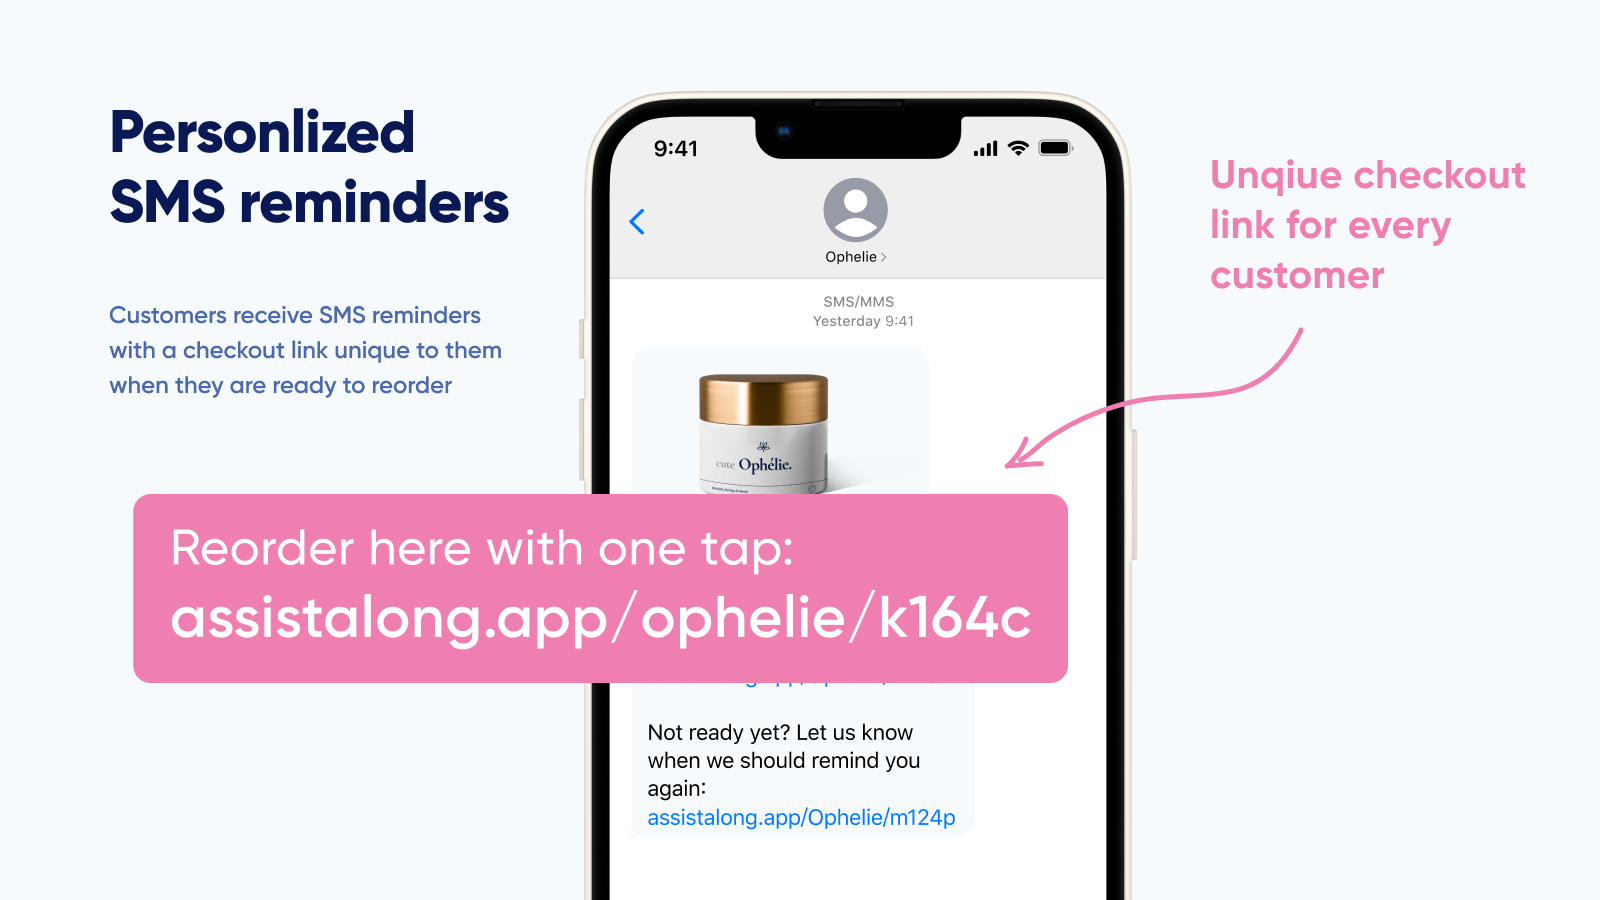 Sends SMS reminders with a checkout link unique to each customer